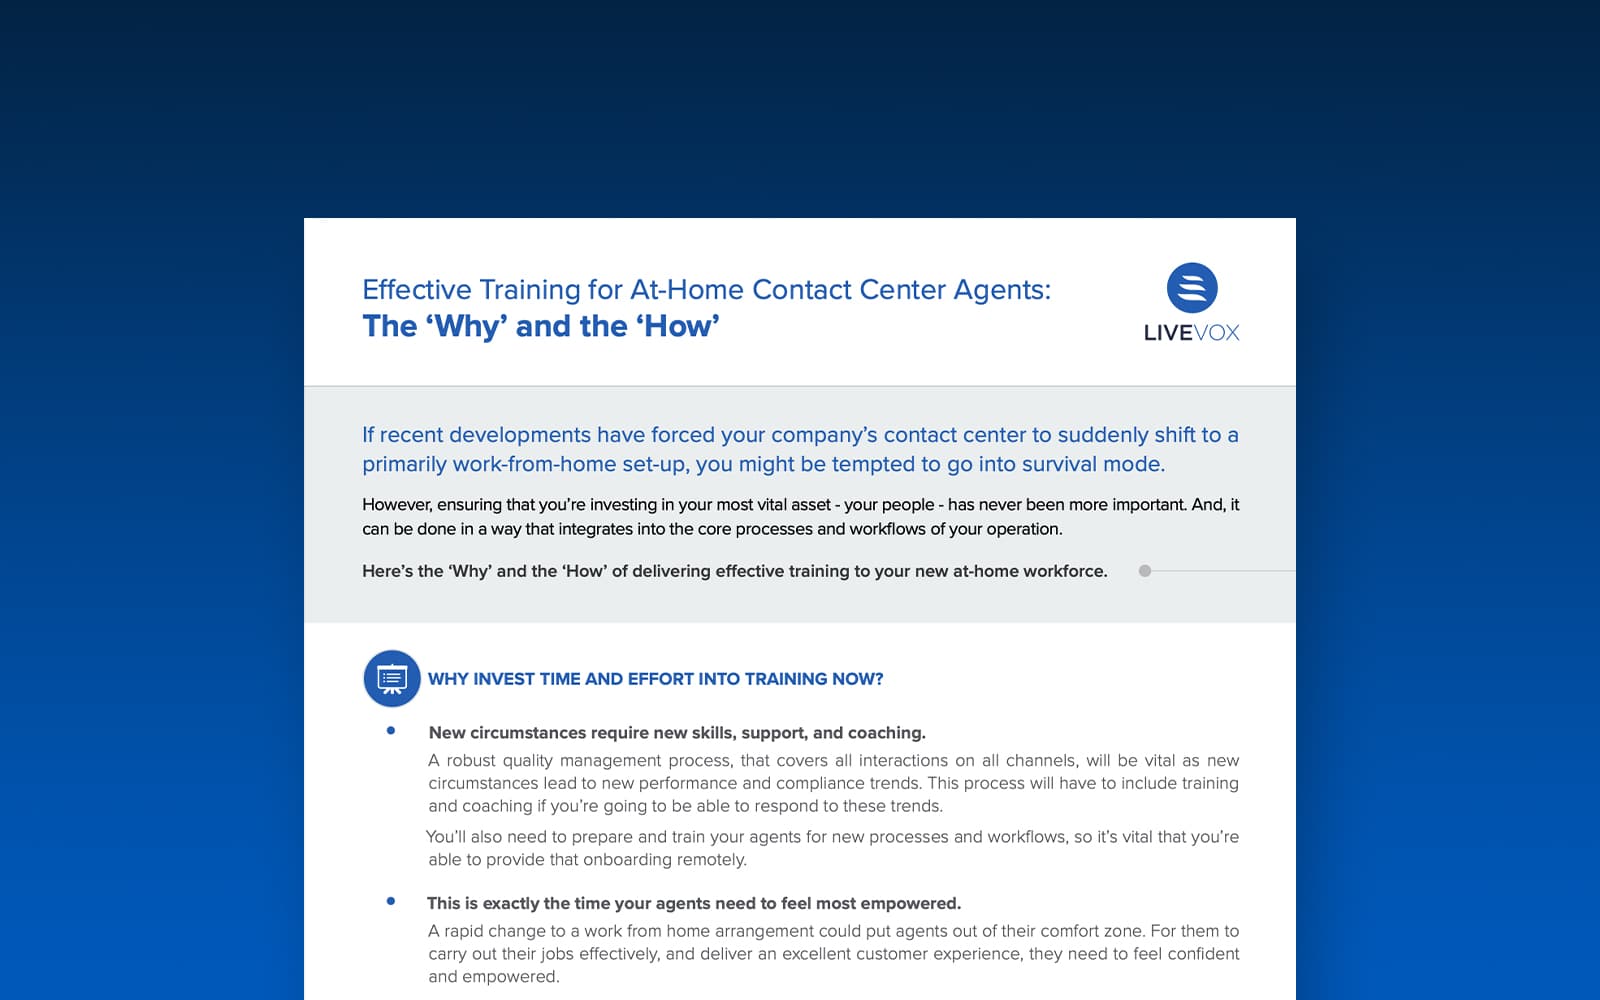 Tip Sheet: Effective Training for At-Home Contact Center Agents: The ‘Why’ and the ‘How’